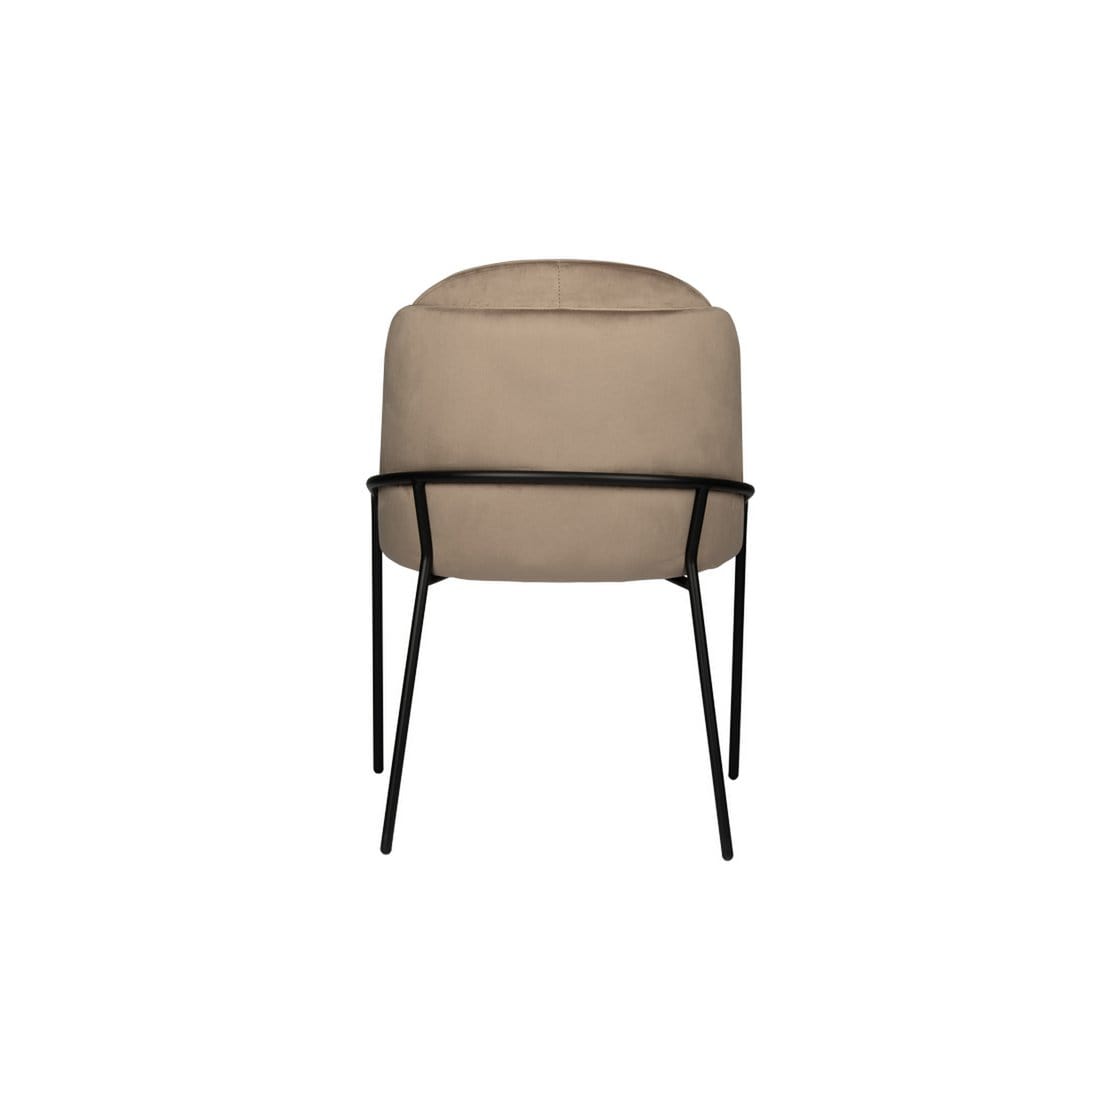 Pole To Pole Fjord chair Dove (Set of 2)